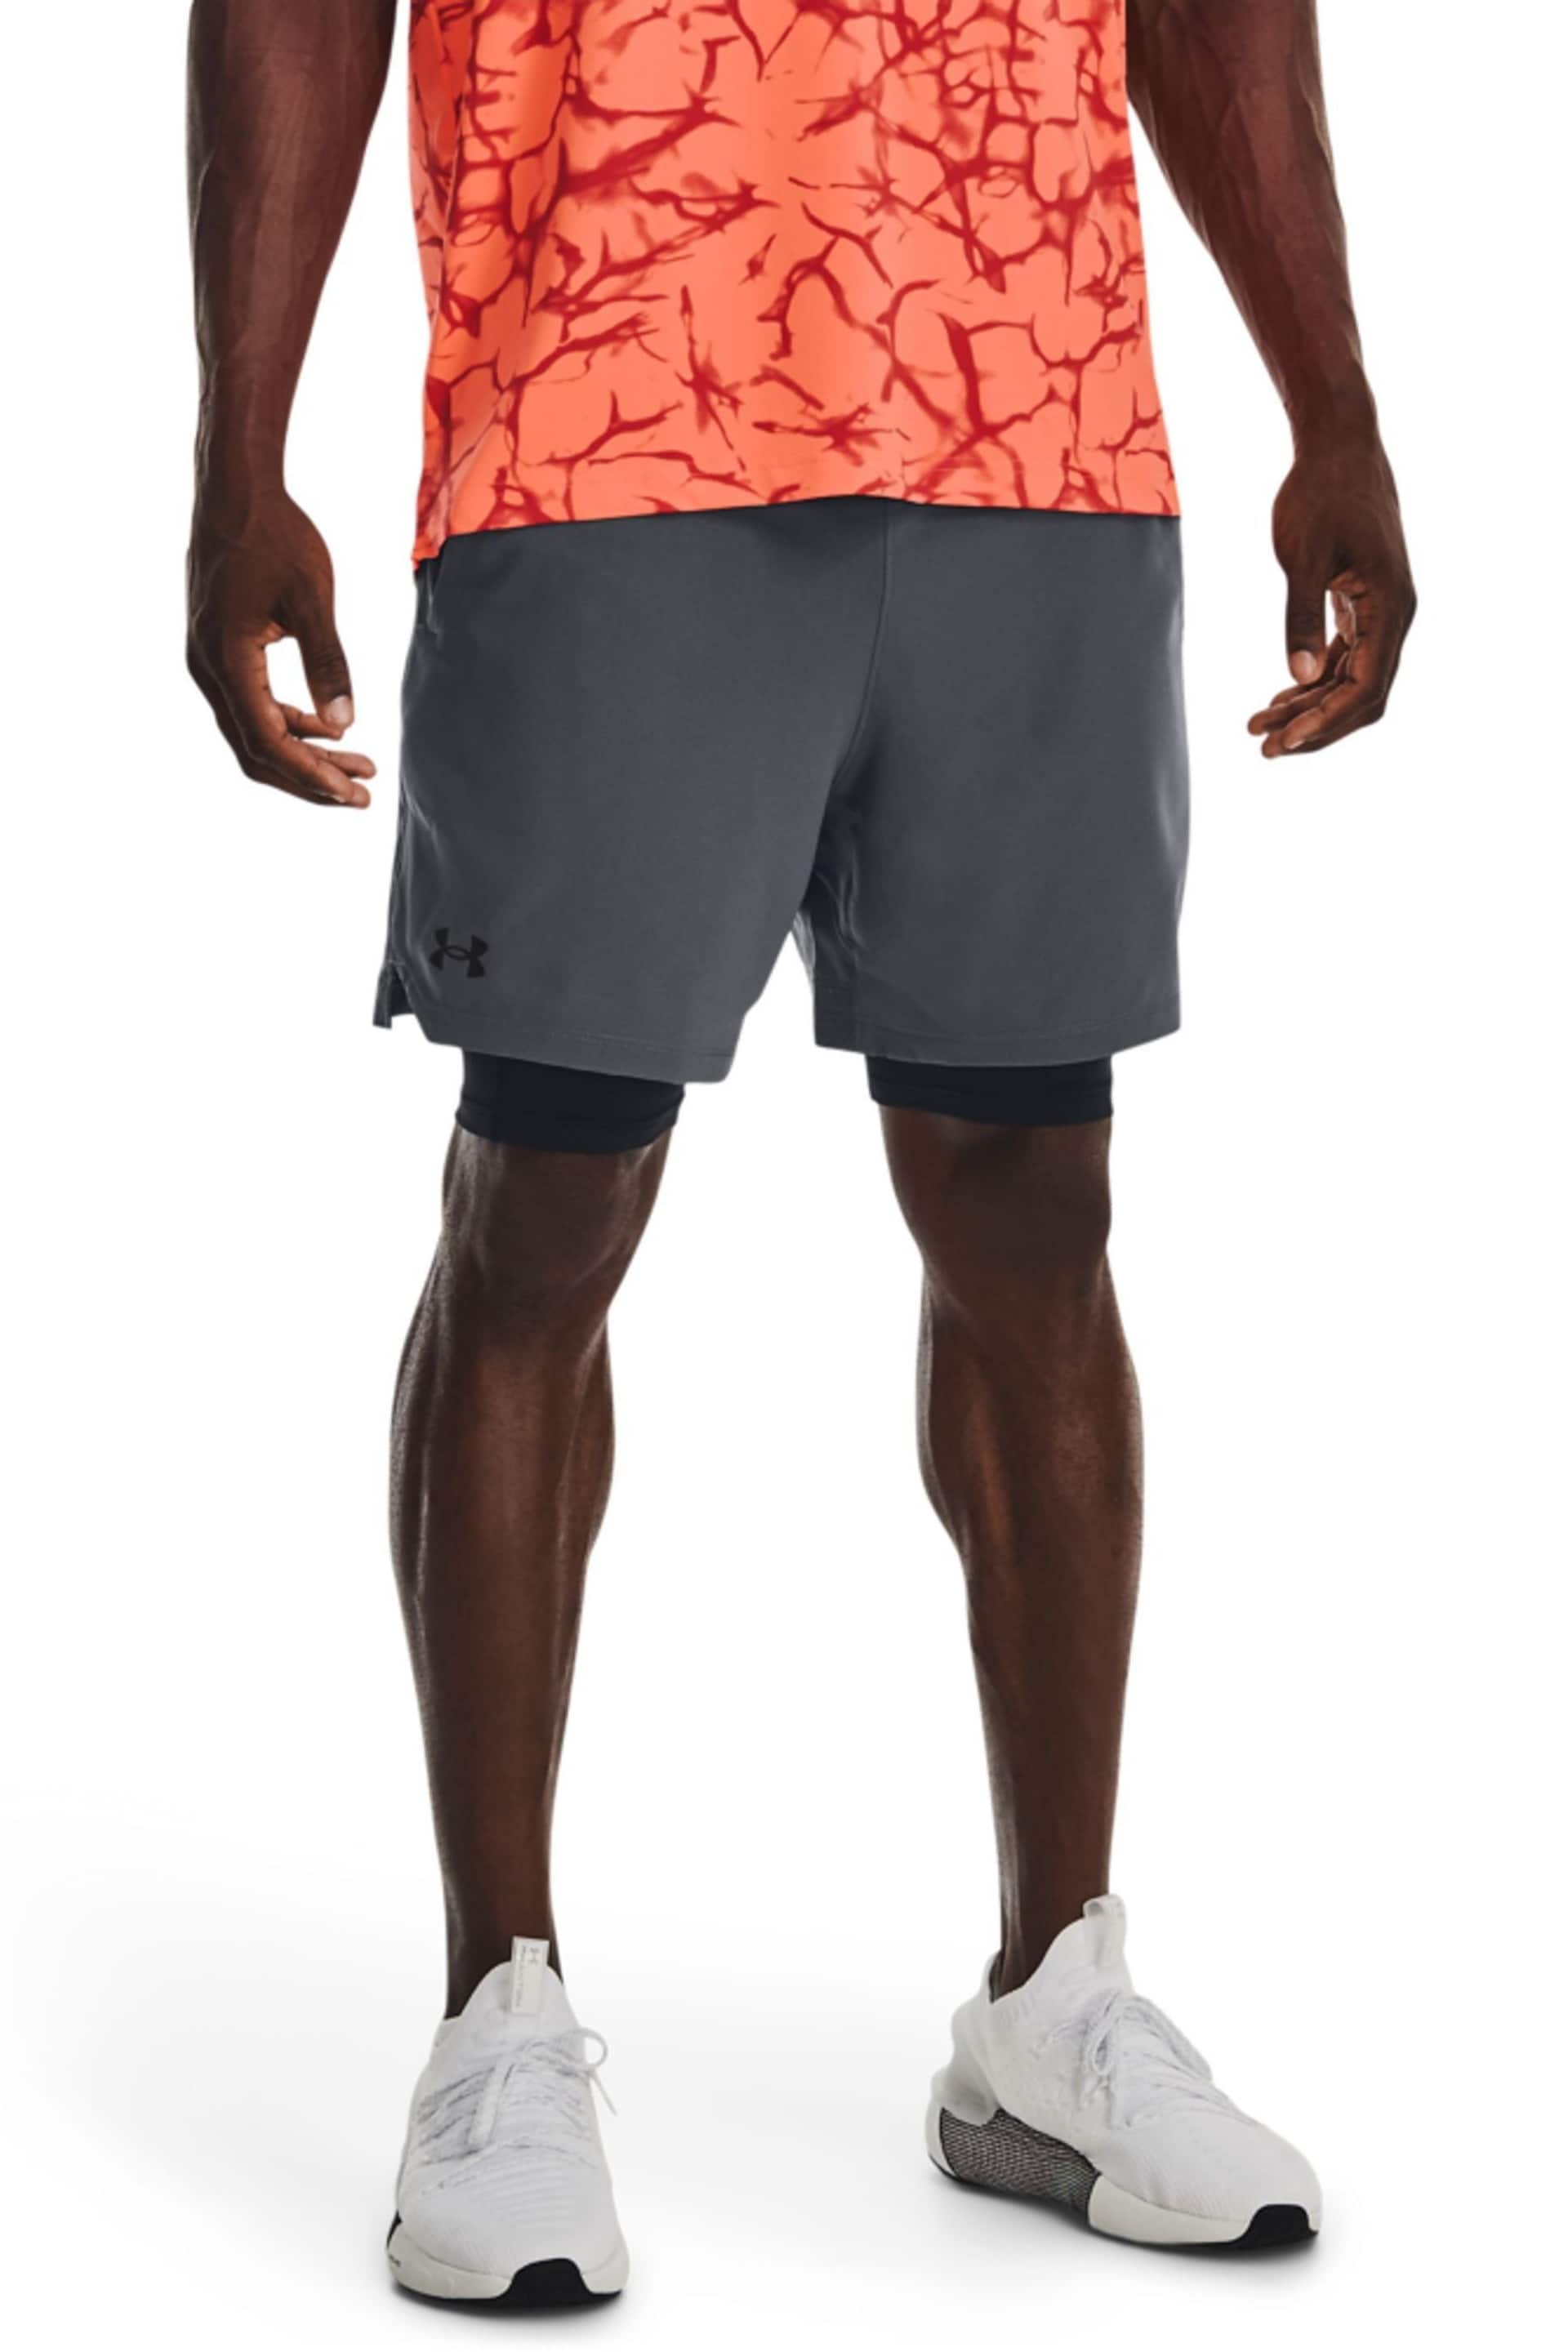 Under Armour Grey Vanish Woven 2-In-1 Shorts - Image 1 of 7